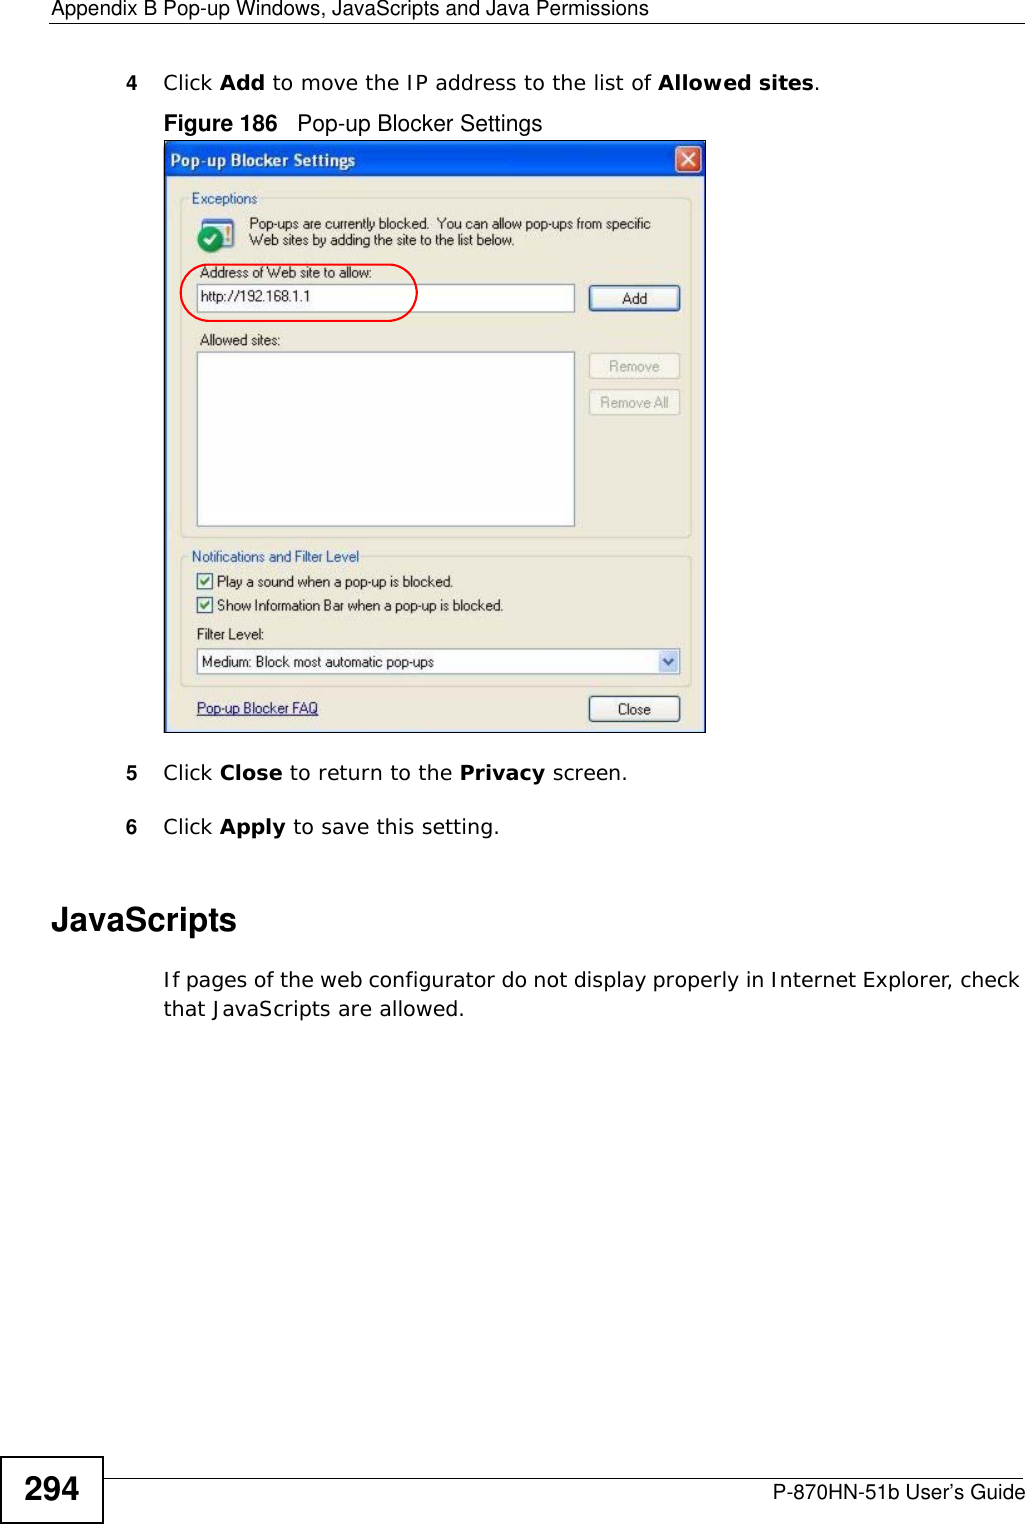 Appendix B Pop-up Windows, JavaScripts and Java PermissionsP-870HN-51b User’s Guide2944Click Add to move the IP address to the list of Allowed sites.Figure 186   Pop-up Blocker Settings5Click Close to return to the Privacy screen. 6Click Apply to save this setting. JavaScriptsIf pages of the web configurator do not display properly in Internet Explorer, check that JavaScripts are allowed. 